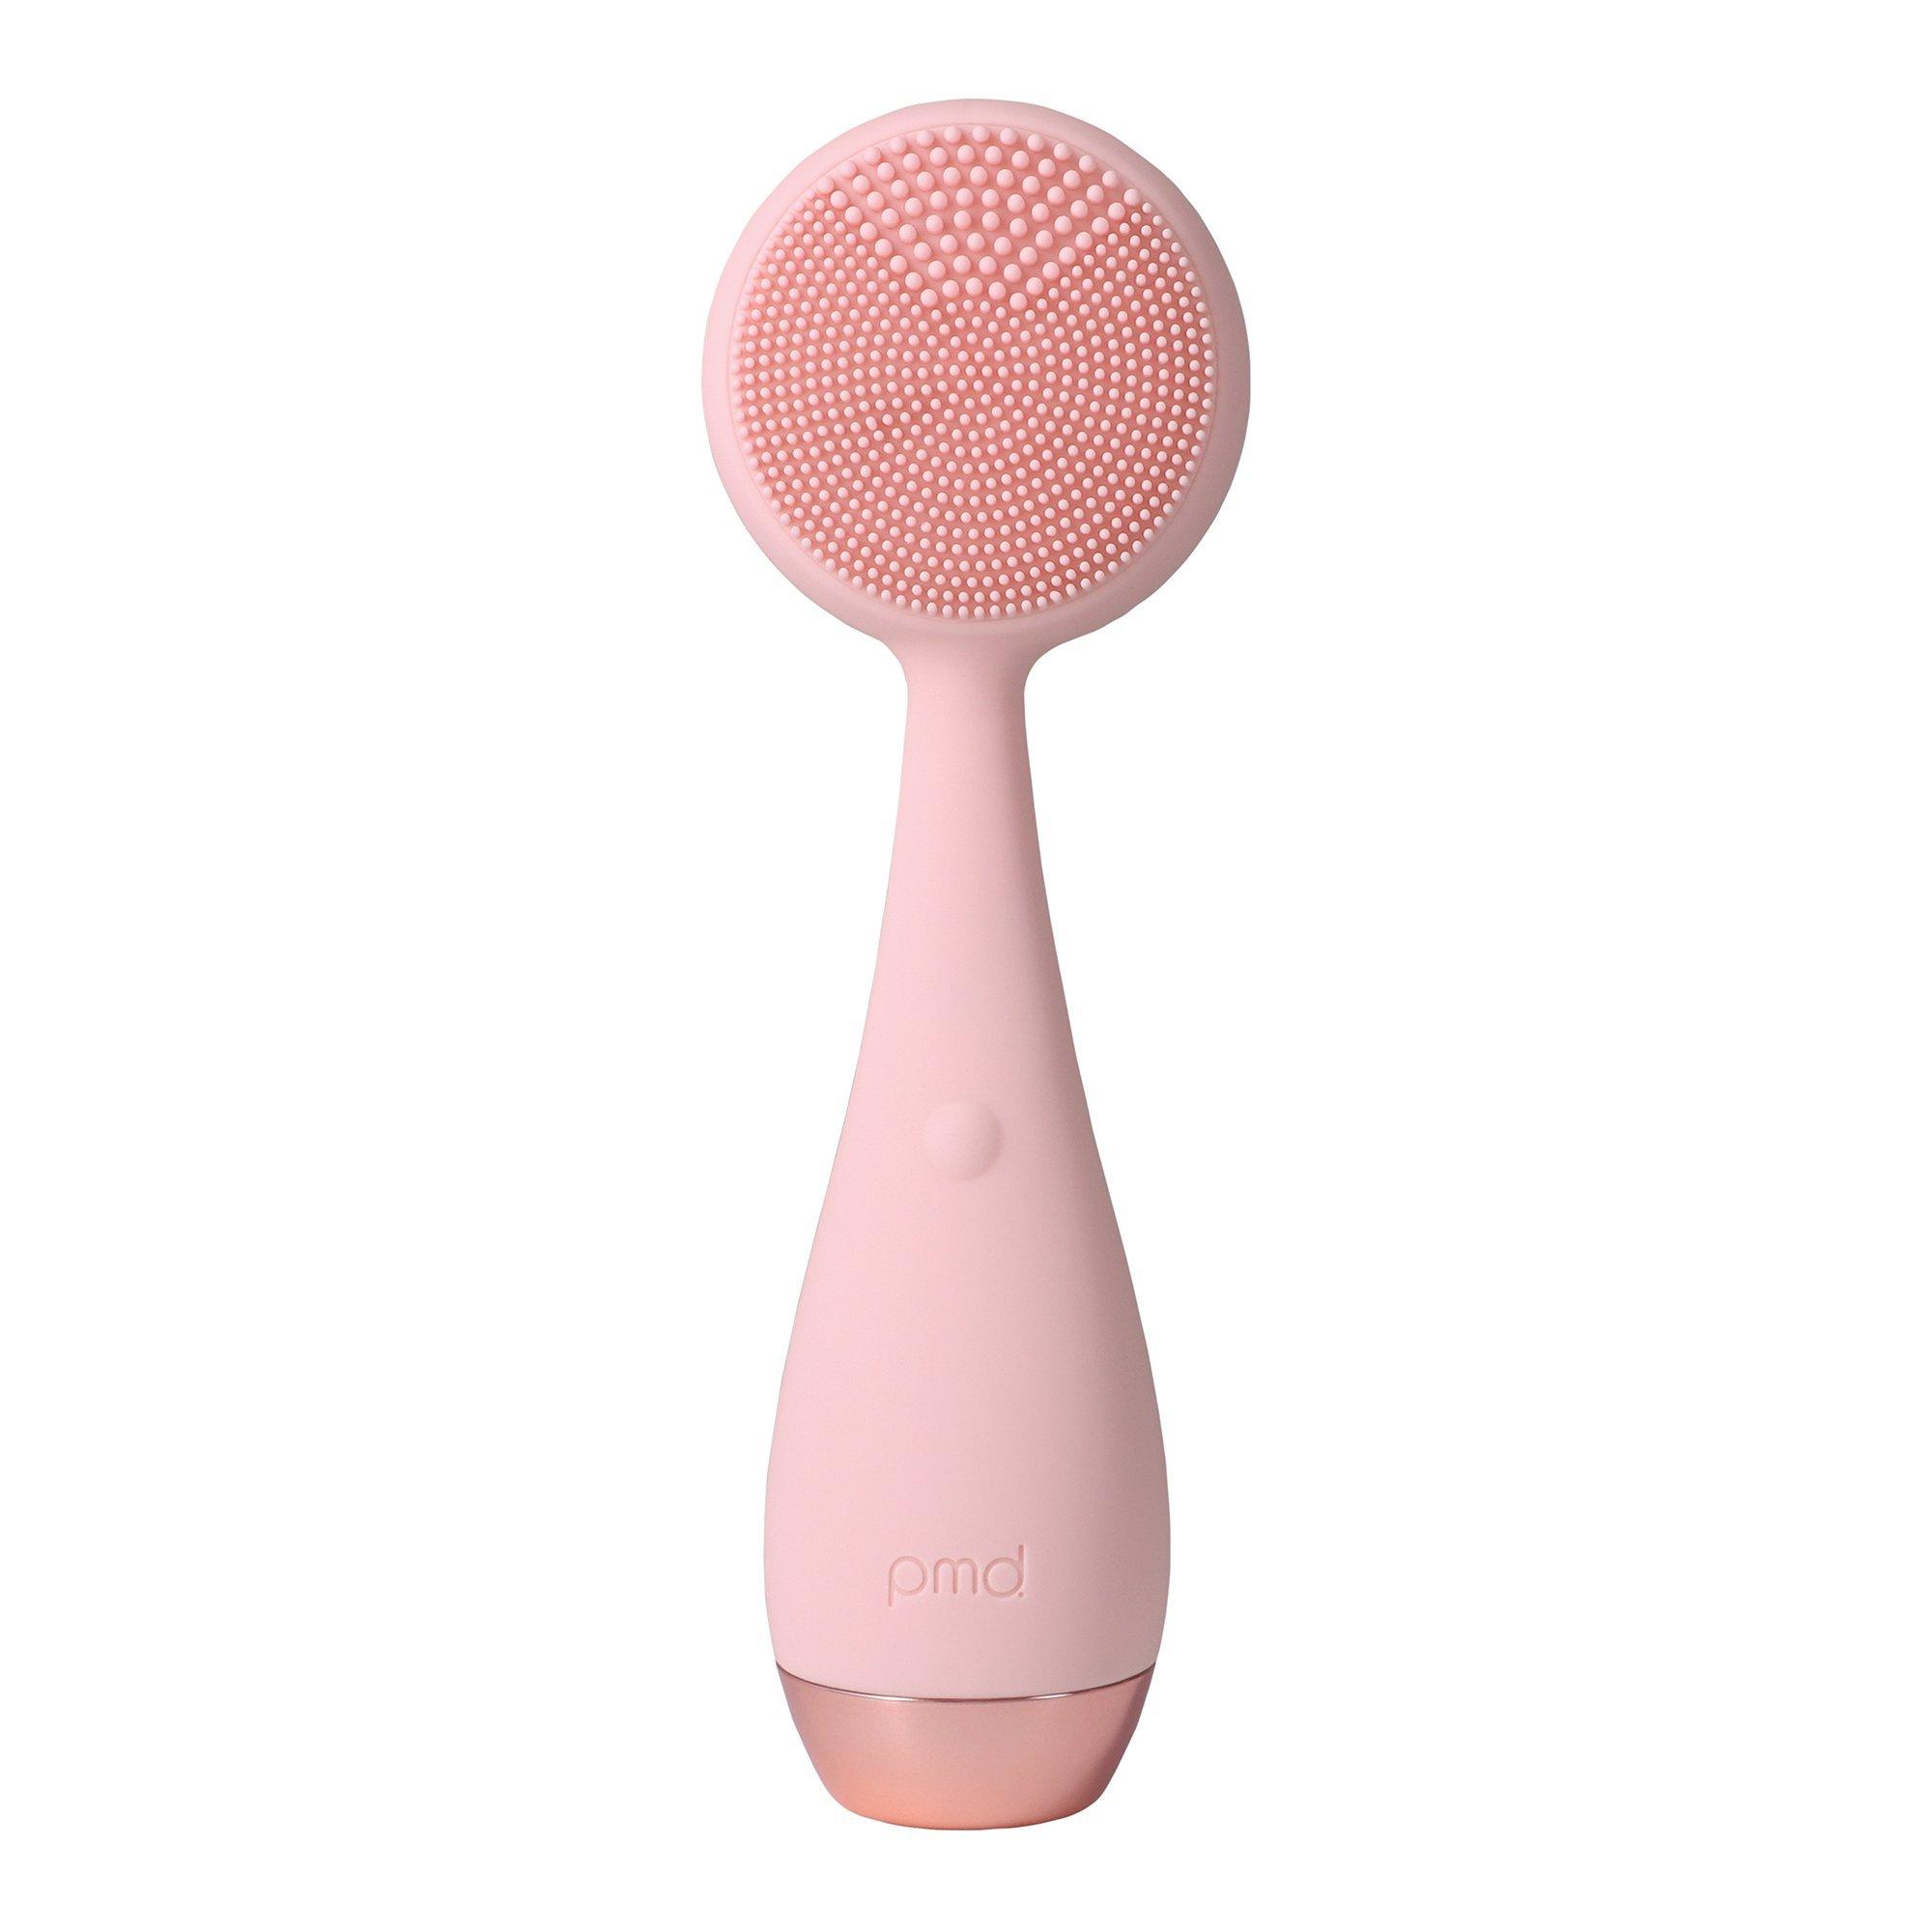 Clean Pro RQ Smart Facial Cleansing Device photo